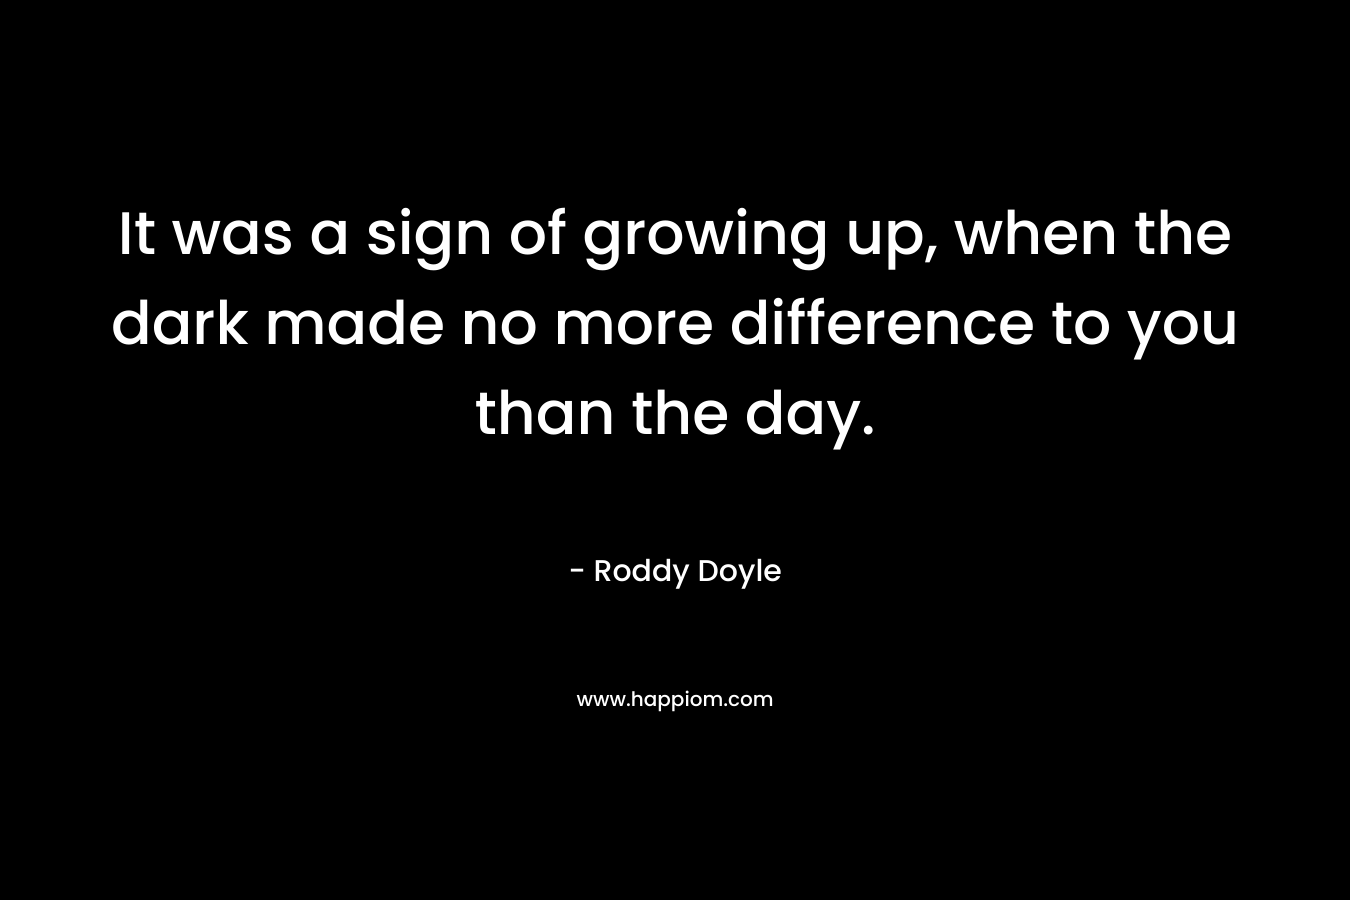 It was a sign of growing up, when the dark made no more difference to you than the day. – Roddy Doyle